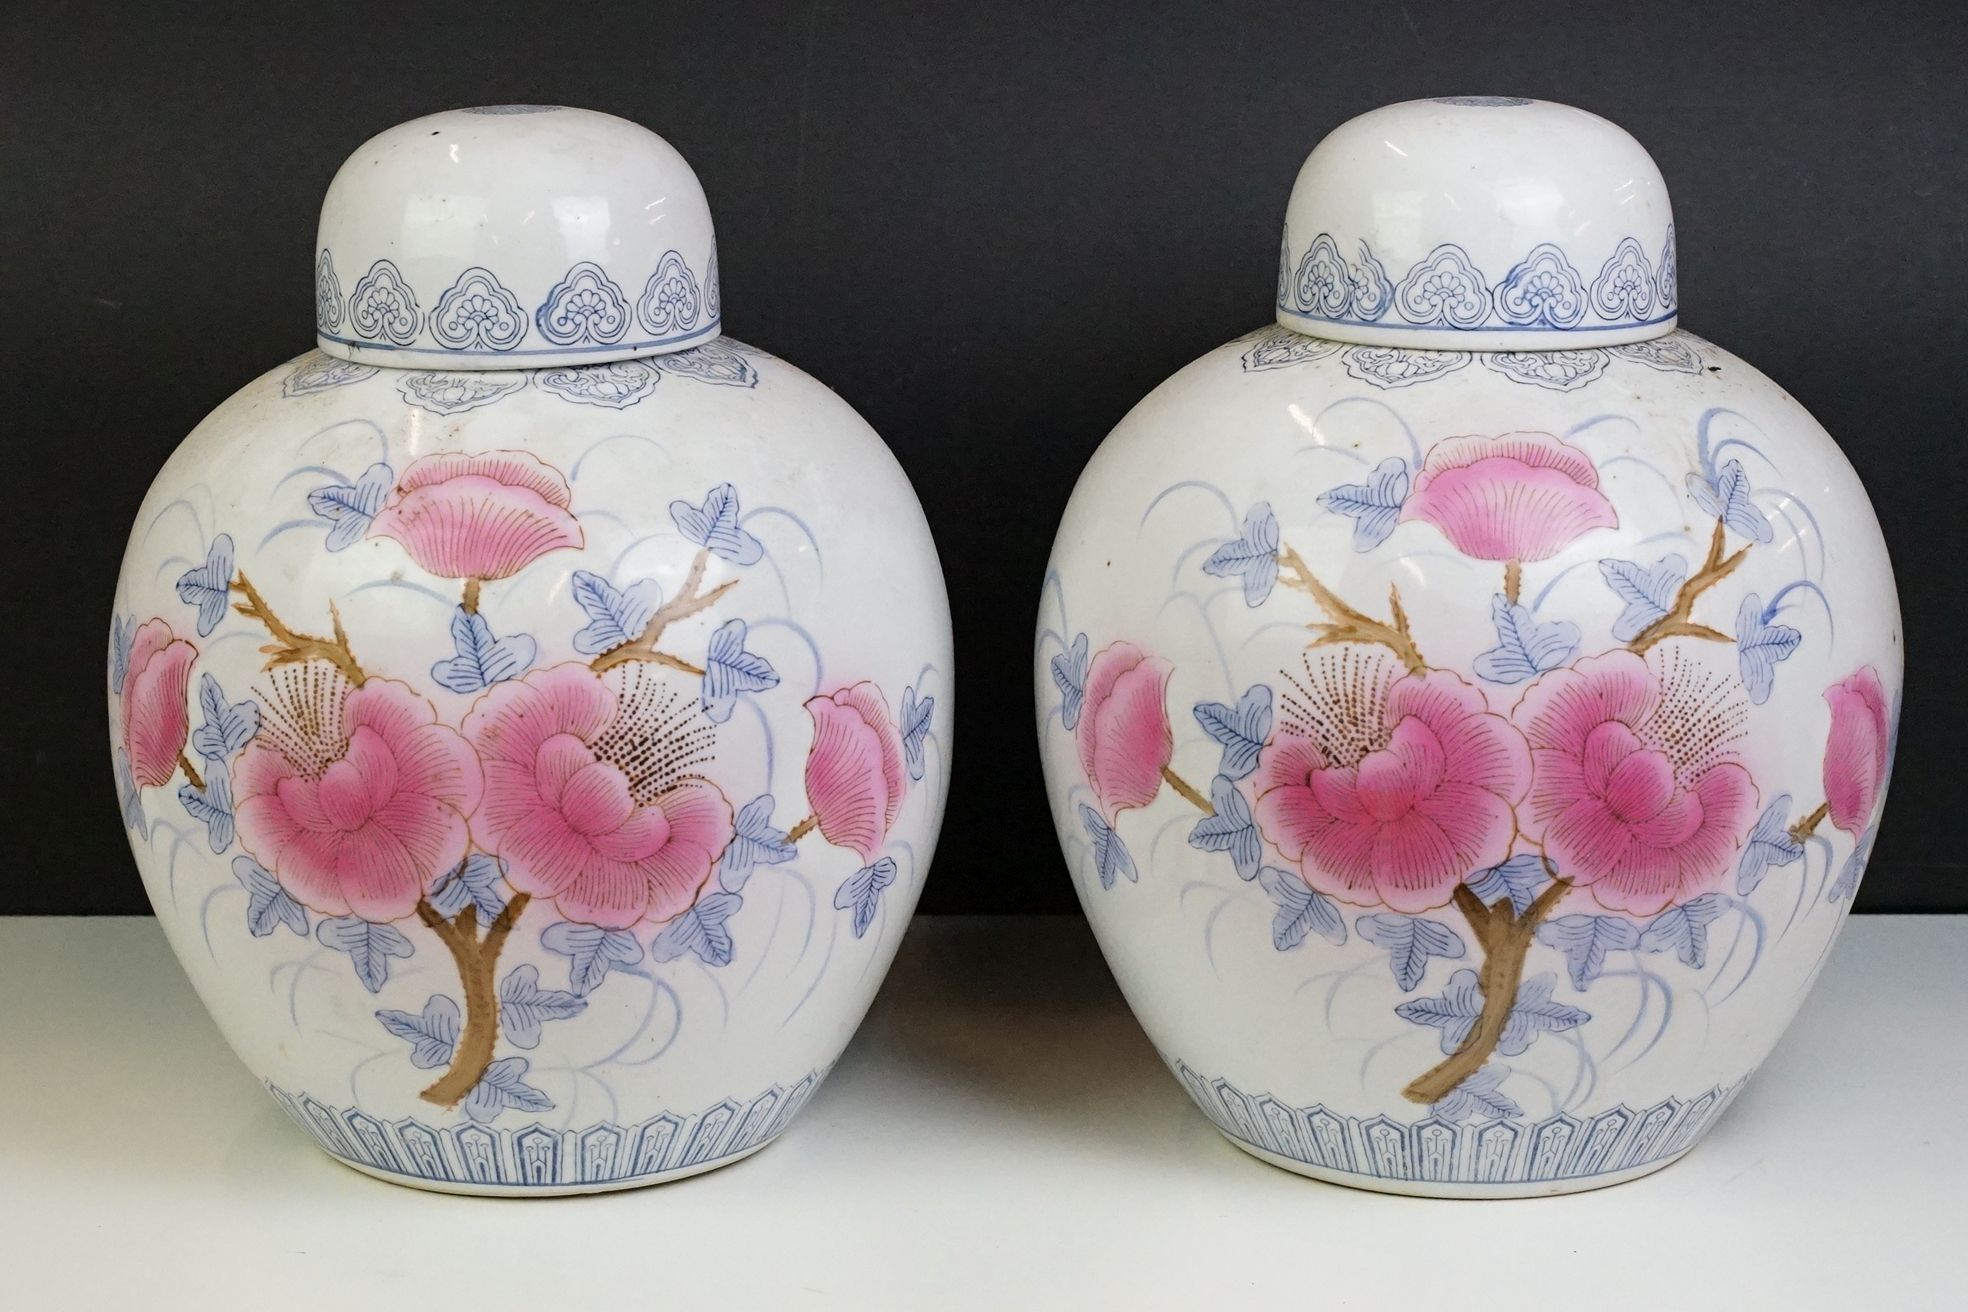 Pair of Chinese large ginger jars, each having printed pink and blue floral designs. Blue seal marks